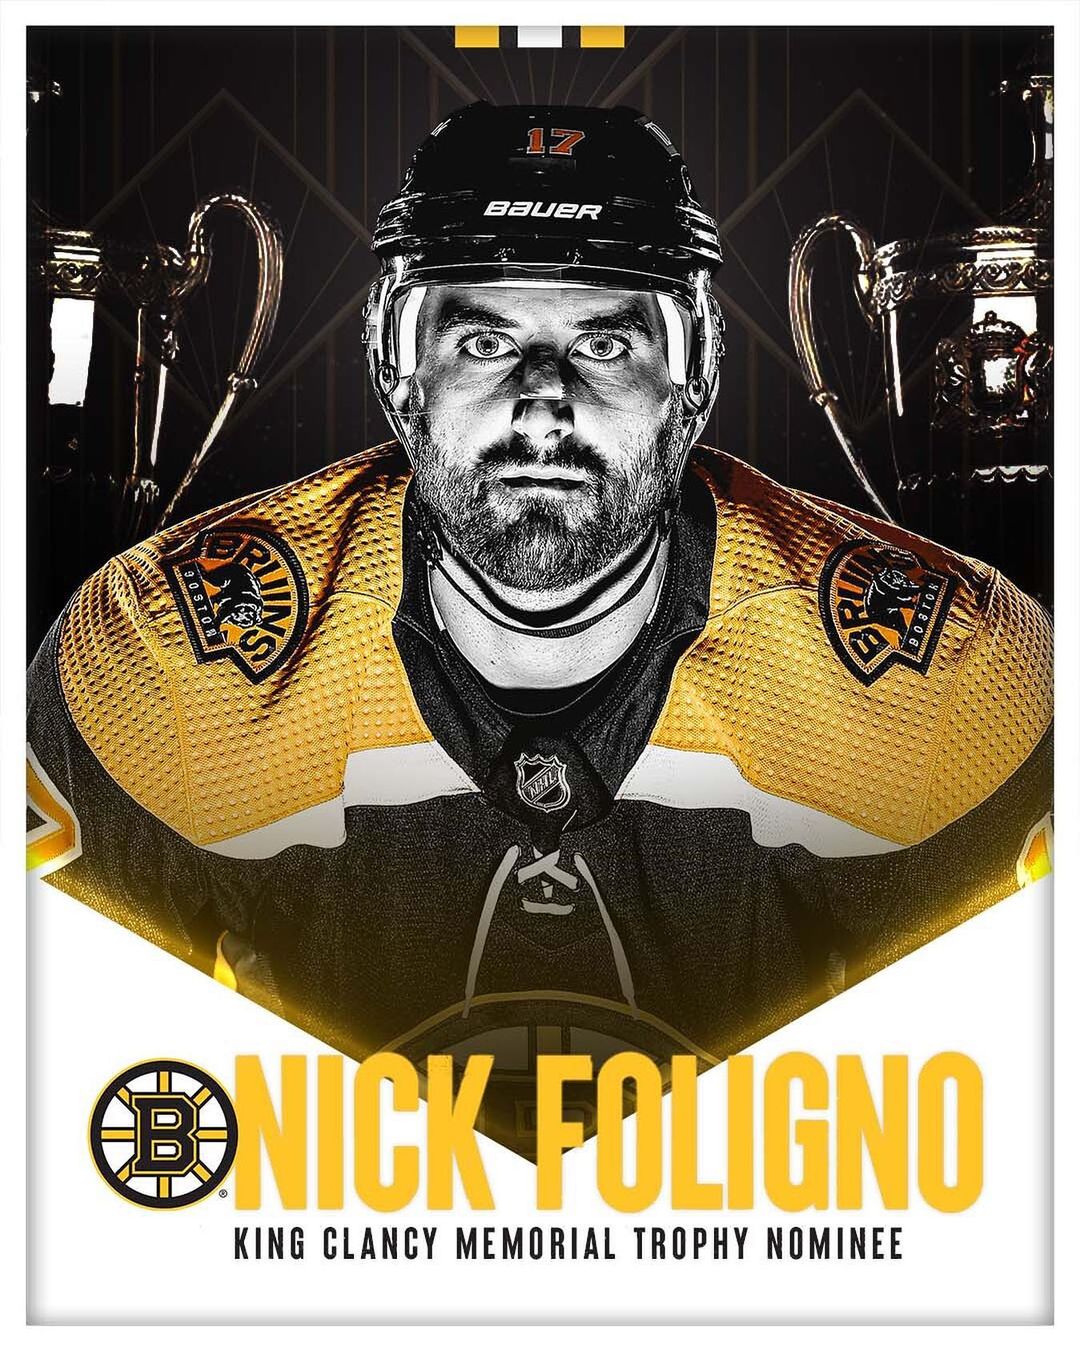 Congratulations to Nick Foligno on being named the #NHLBruins nominee for the 20...